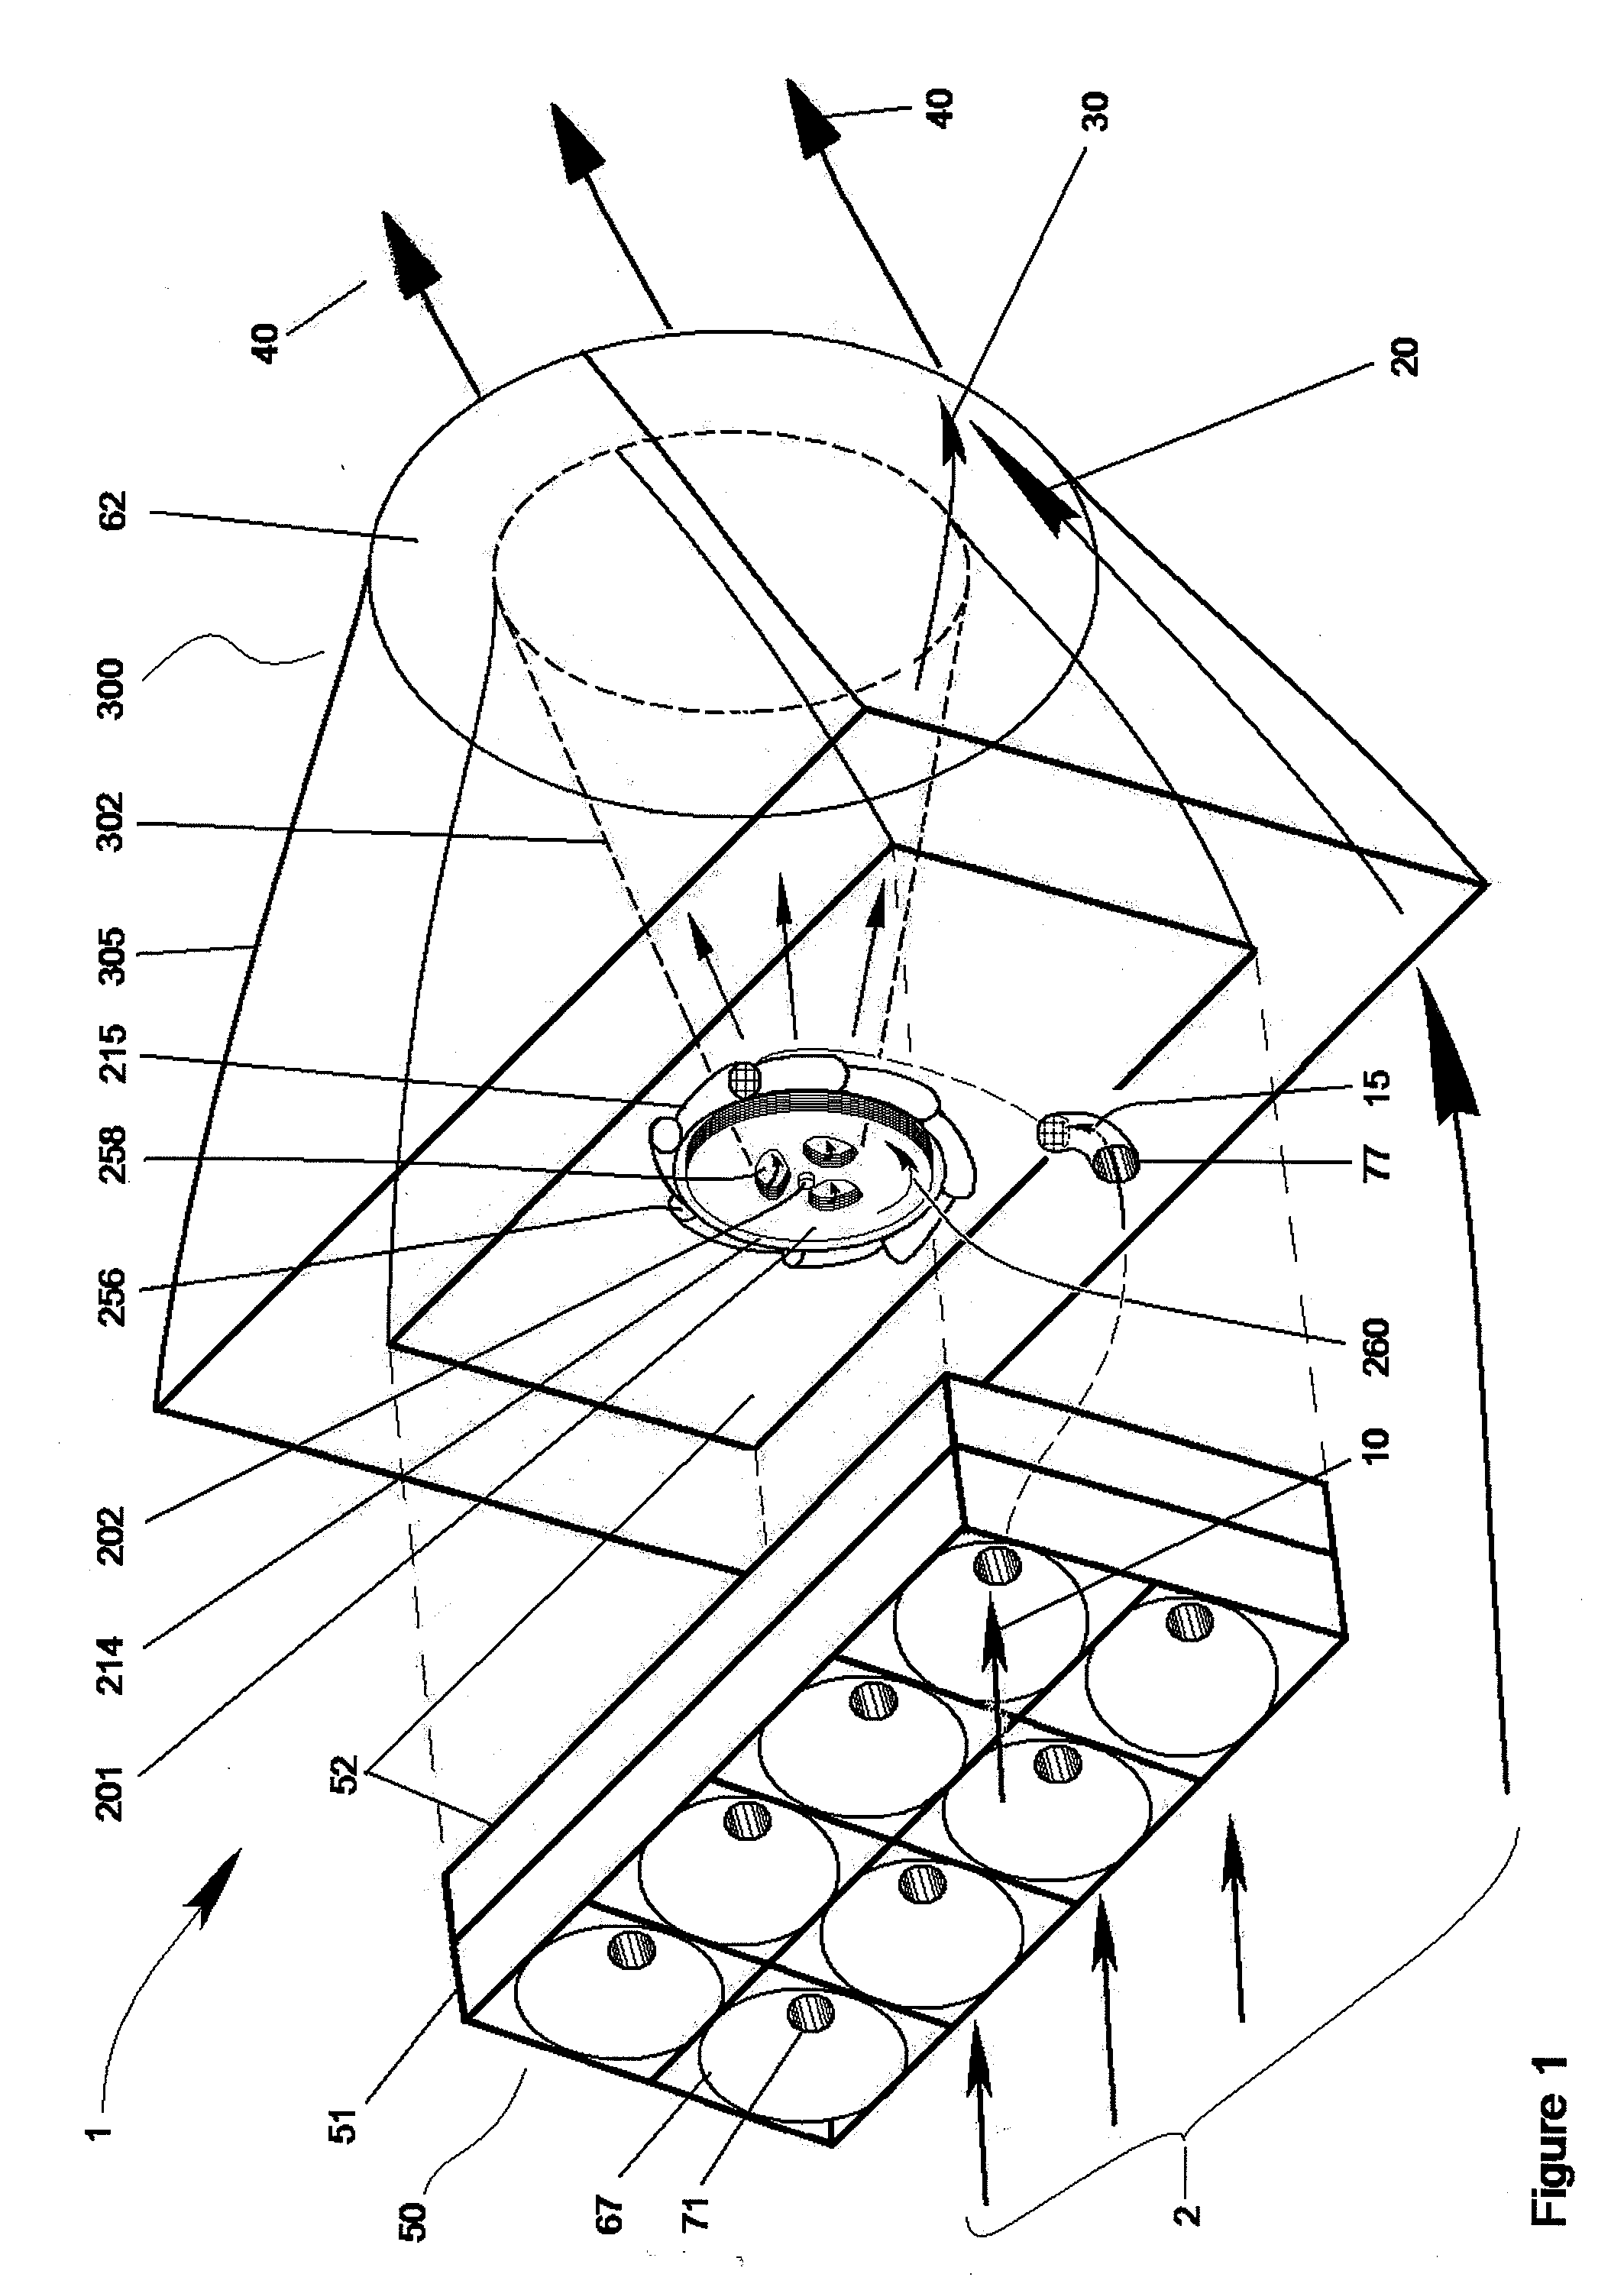 System and method for extracting power from fluid using a tesla-type bladeless turbine